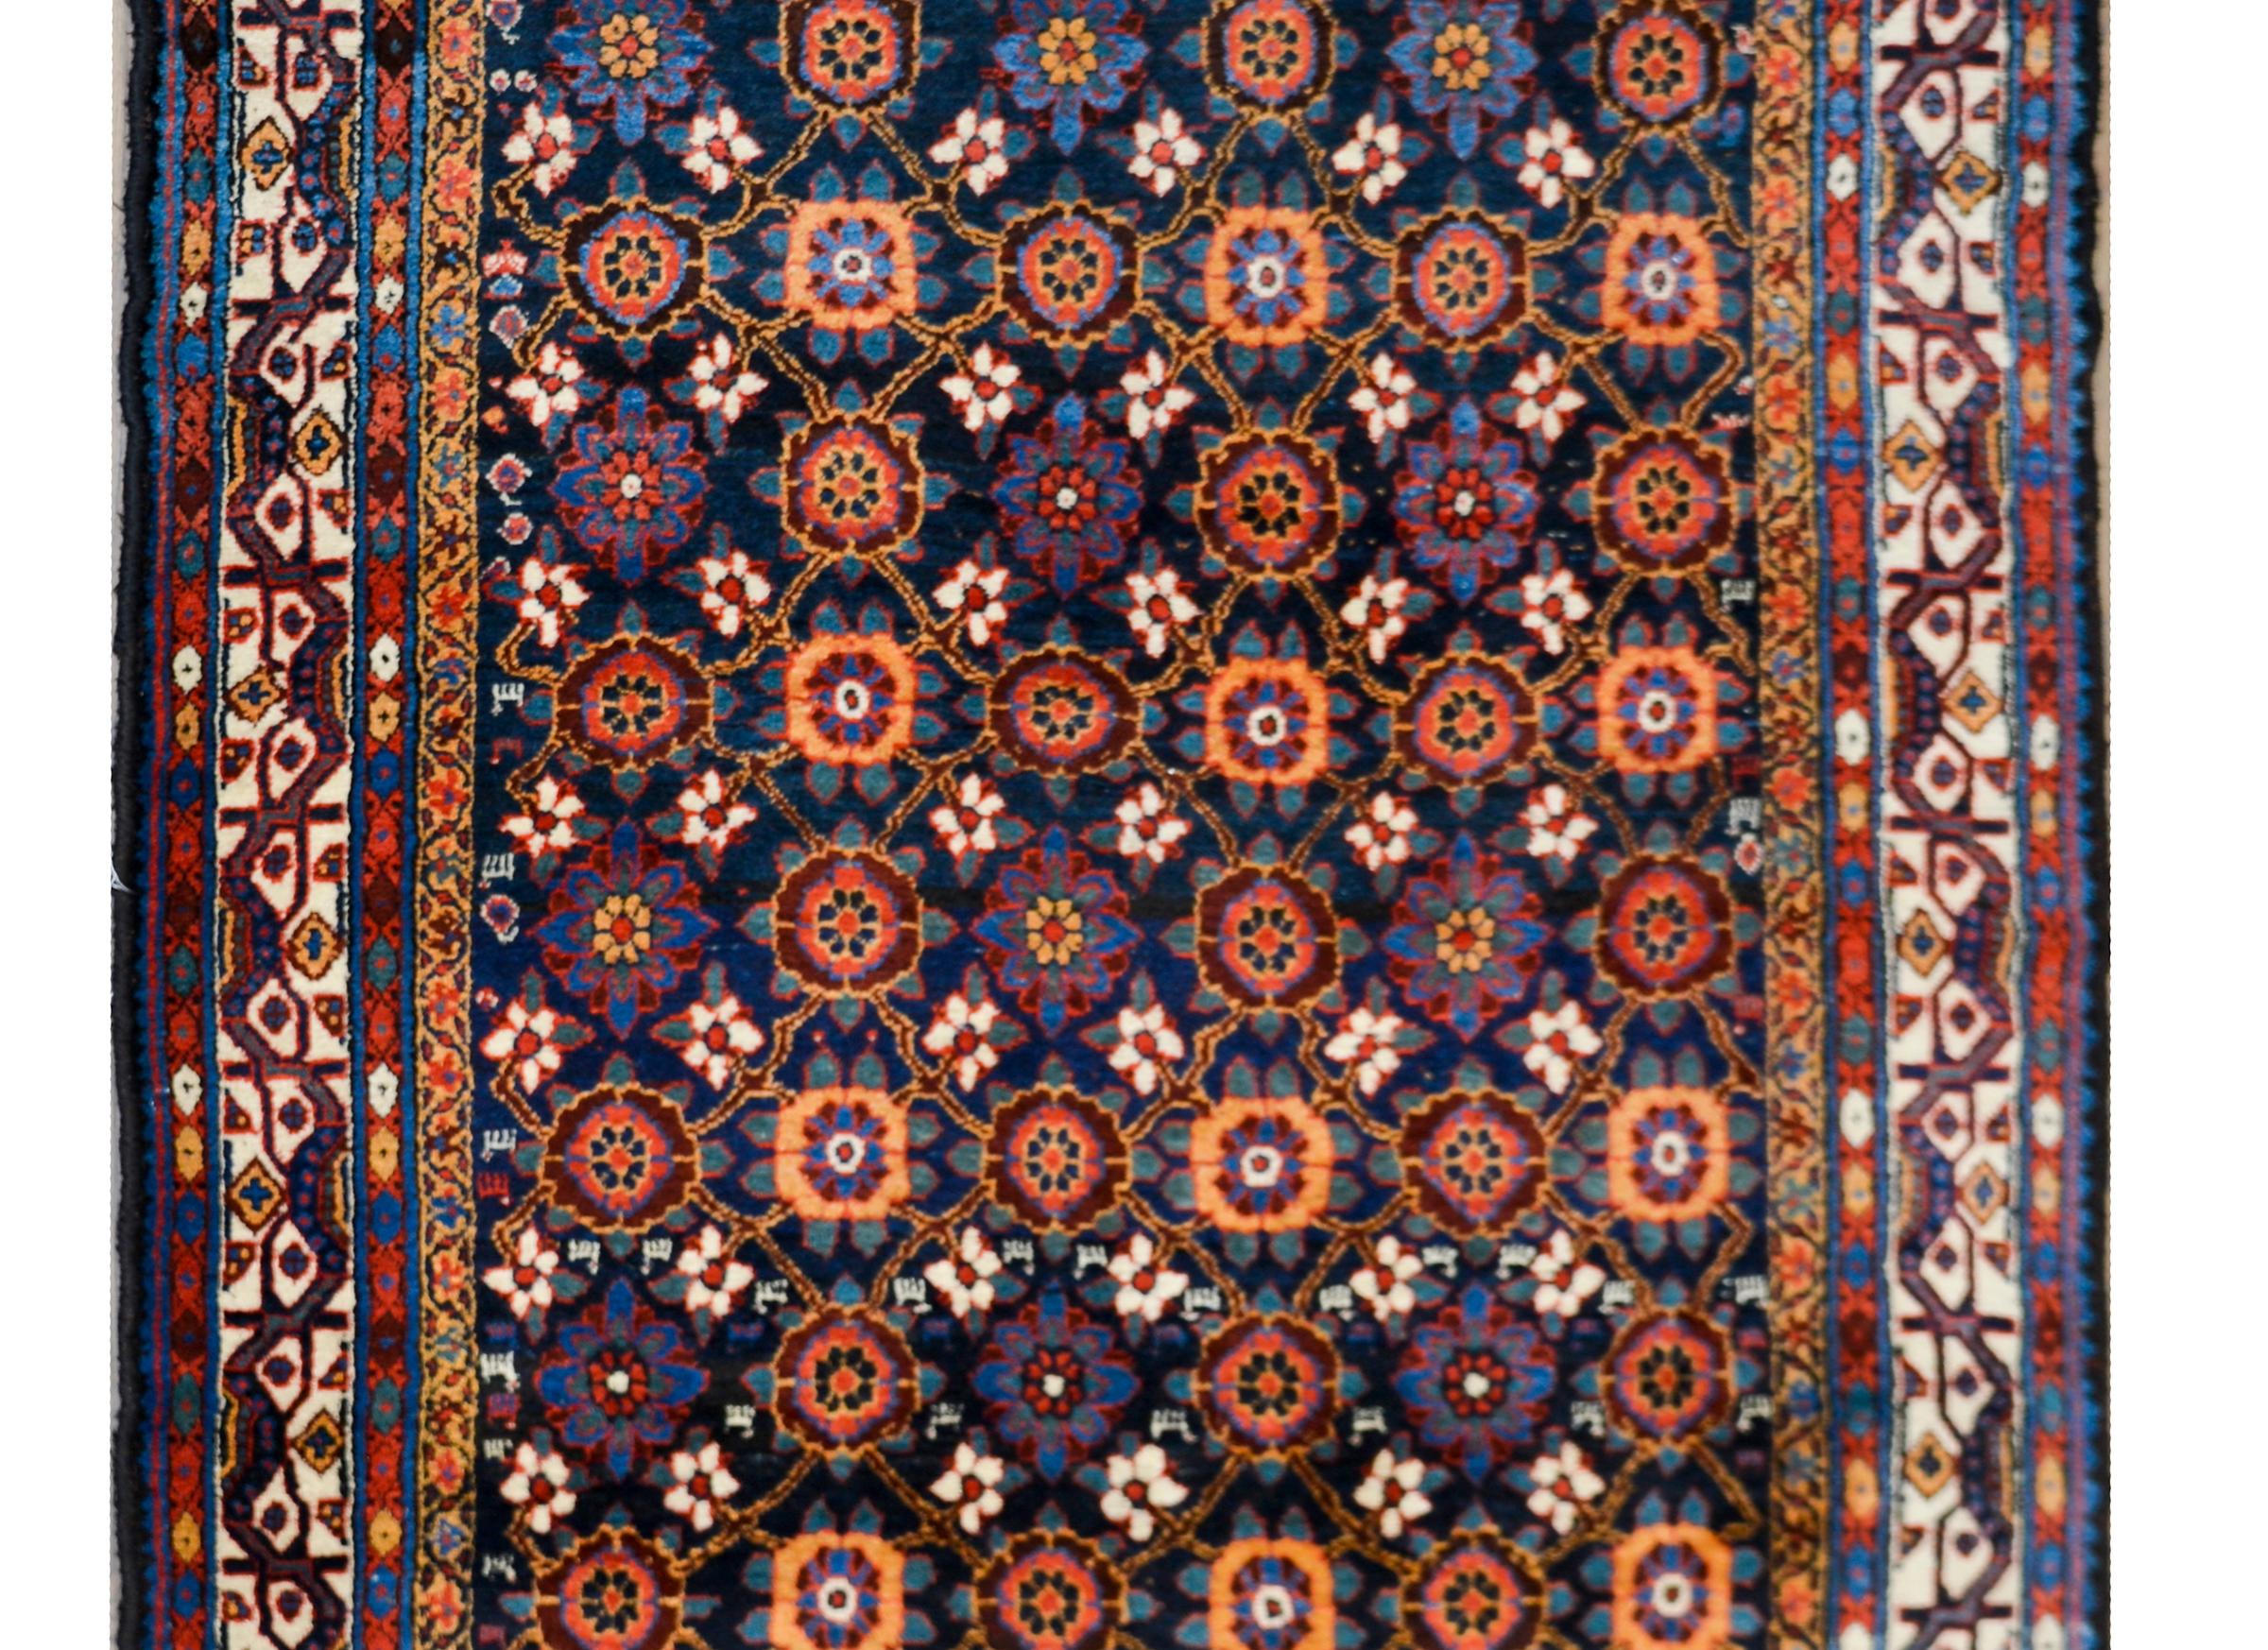 A wonderful early 20th century Persian Afshar rug with a wonderful all over trellis floral pattern woven in bold crimsons, indigos, whites, and golds, set against a dark indigo background and surrounded by a couple floral patterned border.